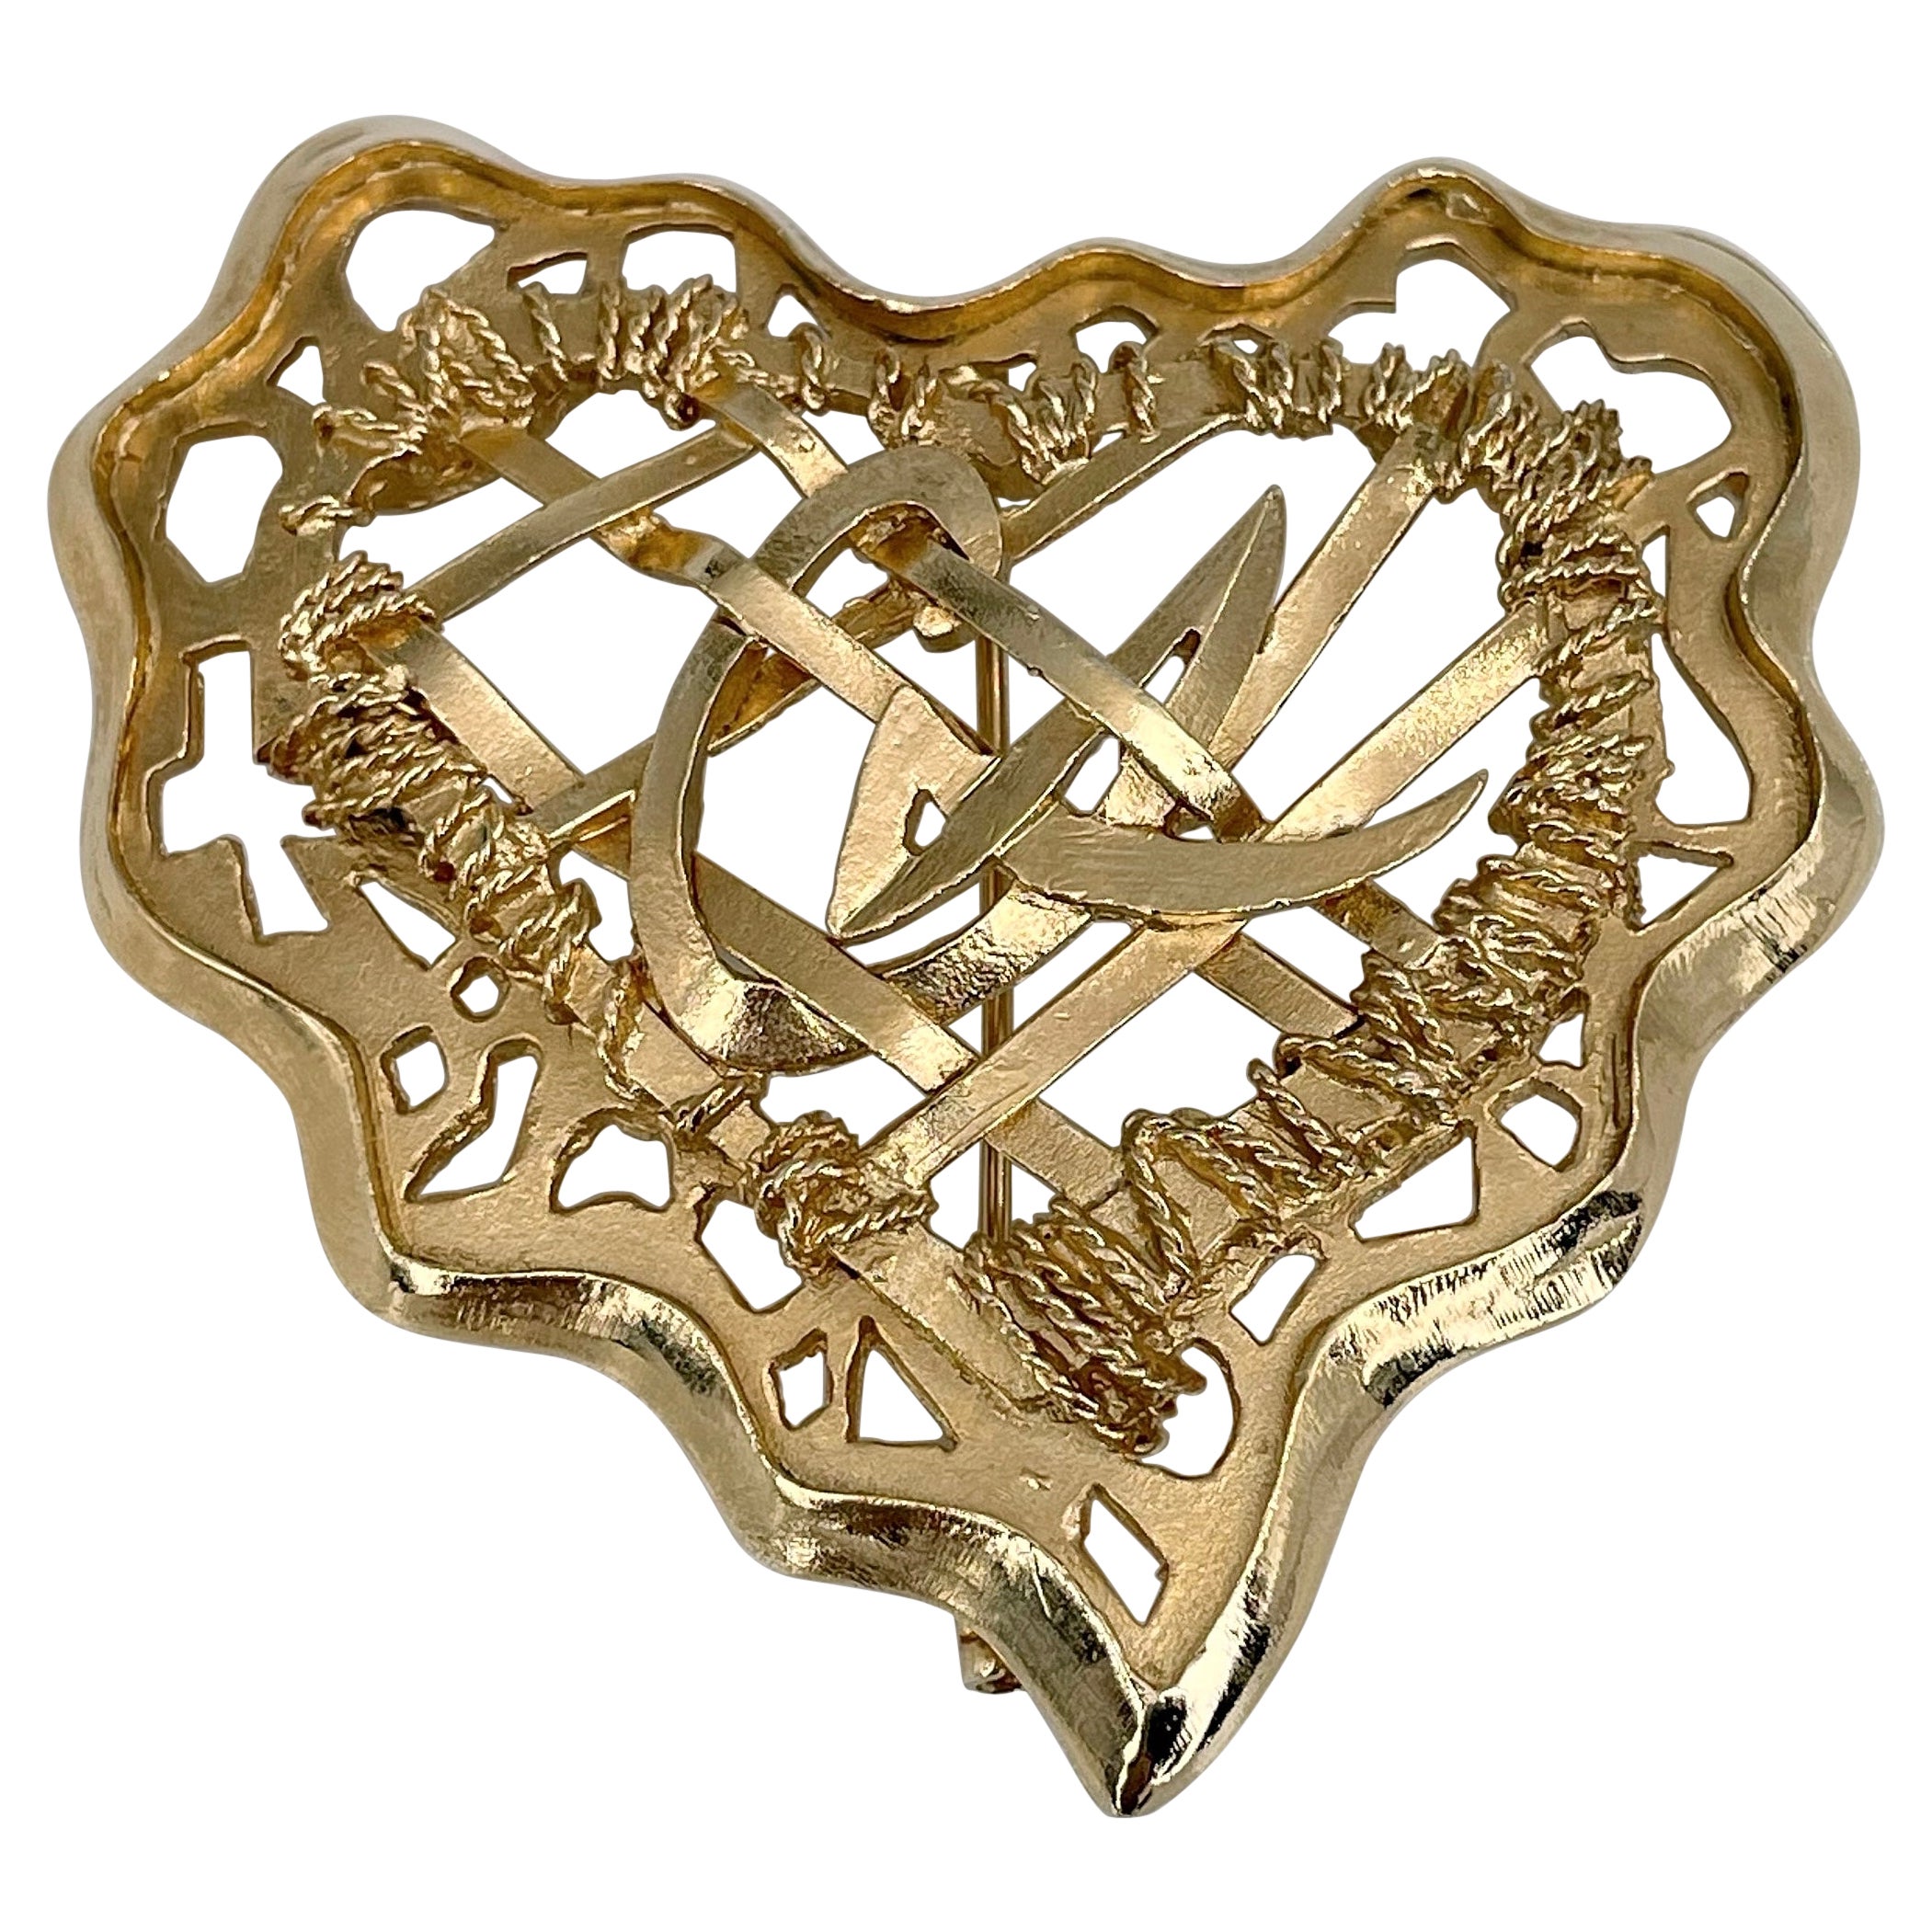 1990s Vintage Christian Lacroix Gold Tone Openwork Design CL Heart Pin Brooch